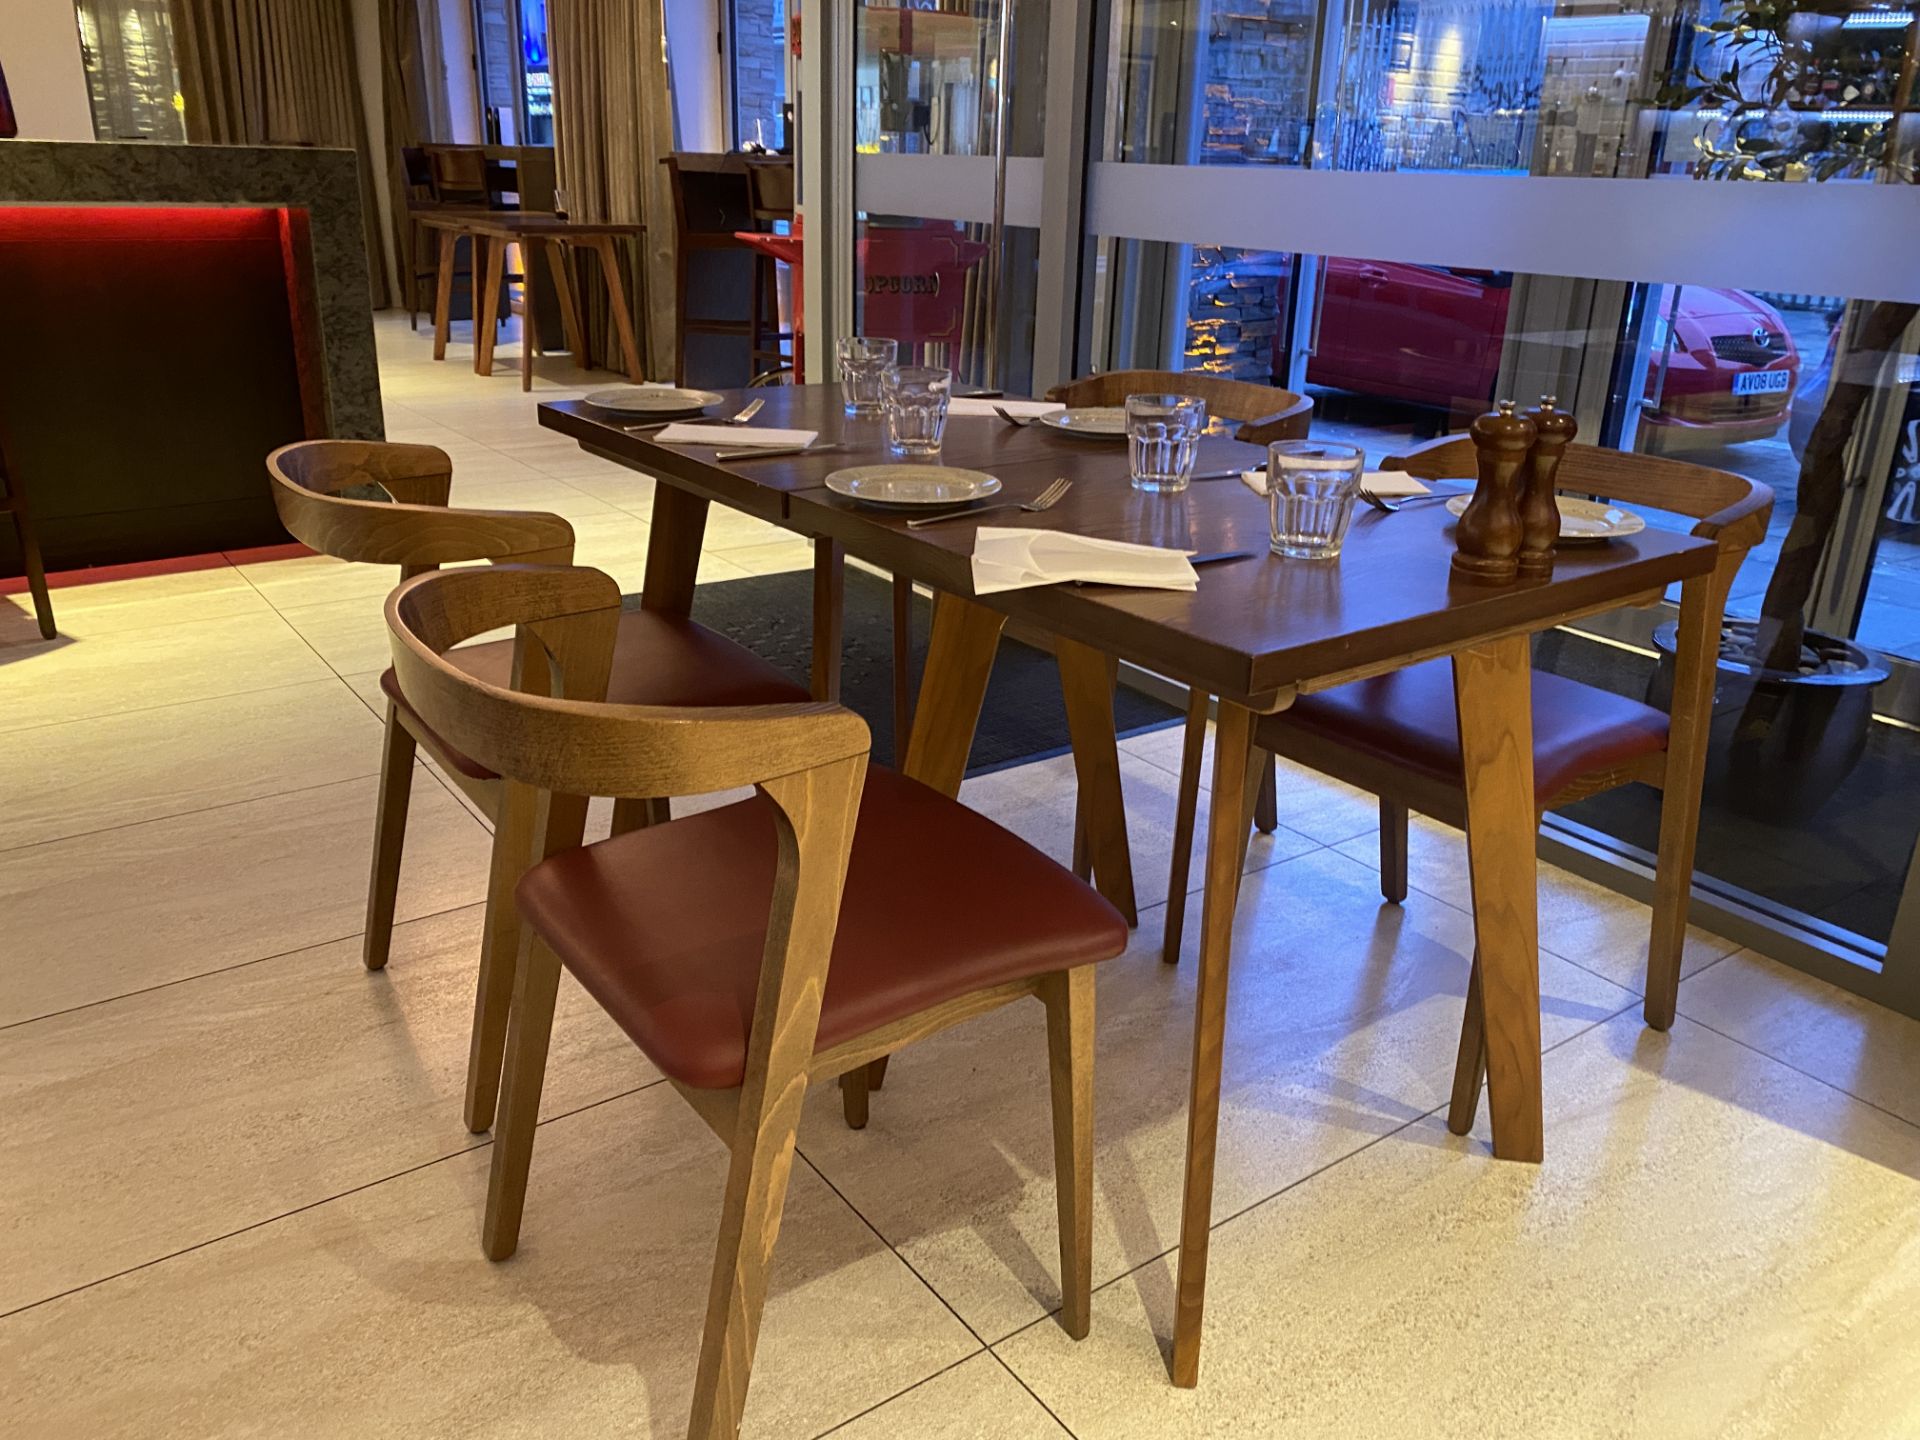 Heavy-duty commercial grade restaurant furniture - Image 2 of 2